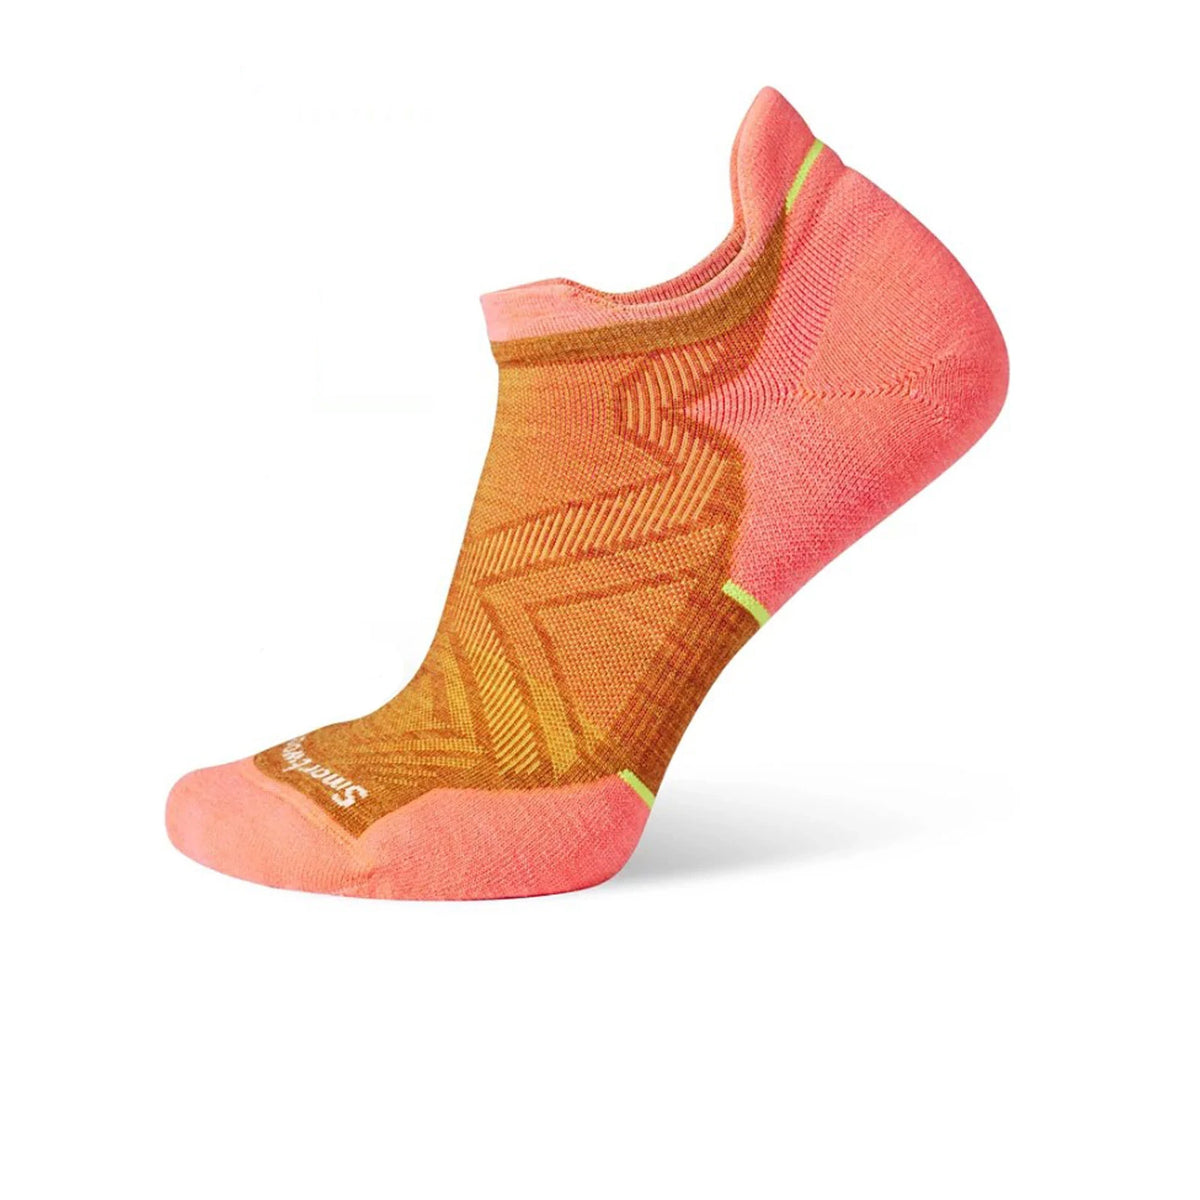 Smartwool - Women's Run Targeted Cushion Low Ankle Socks